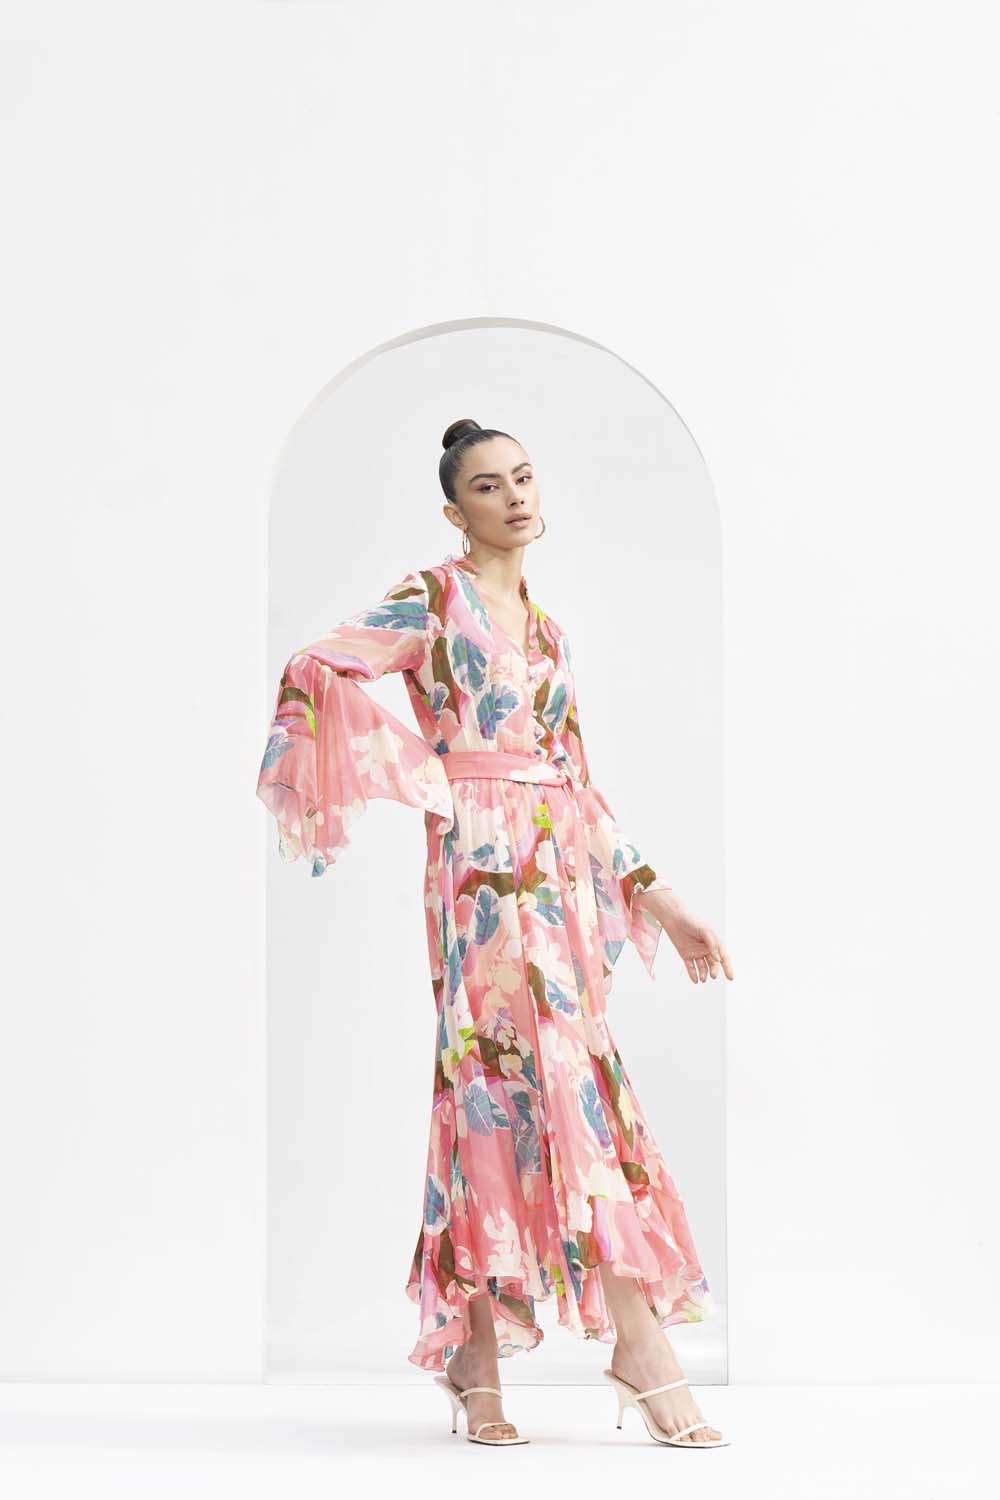 Peach tropical printed chiffon dress with godets and ruffled details on the neckline.